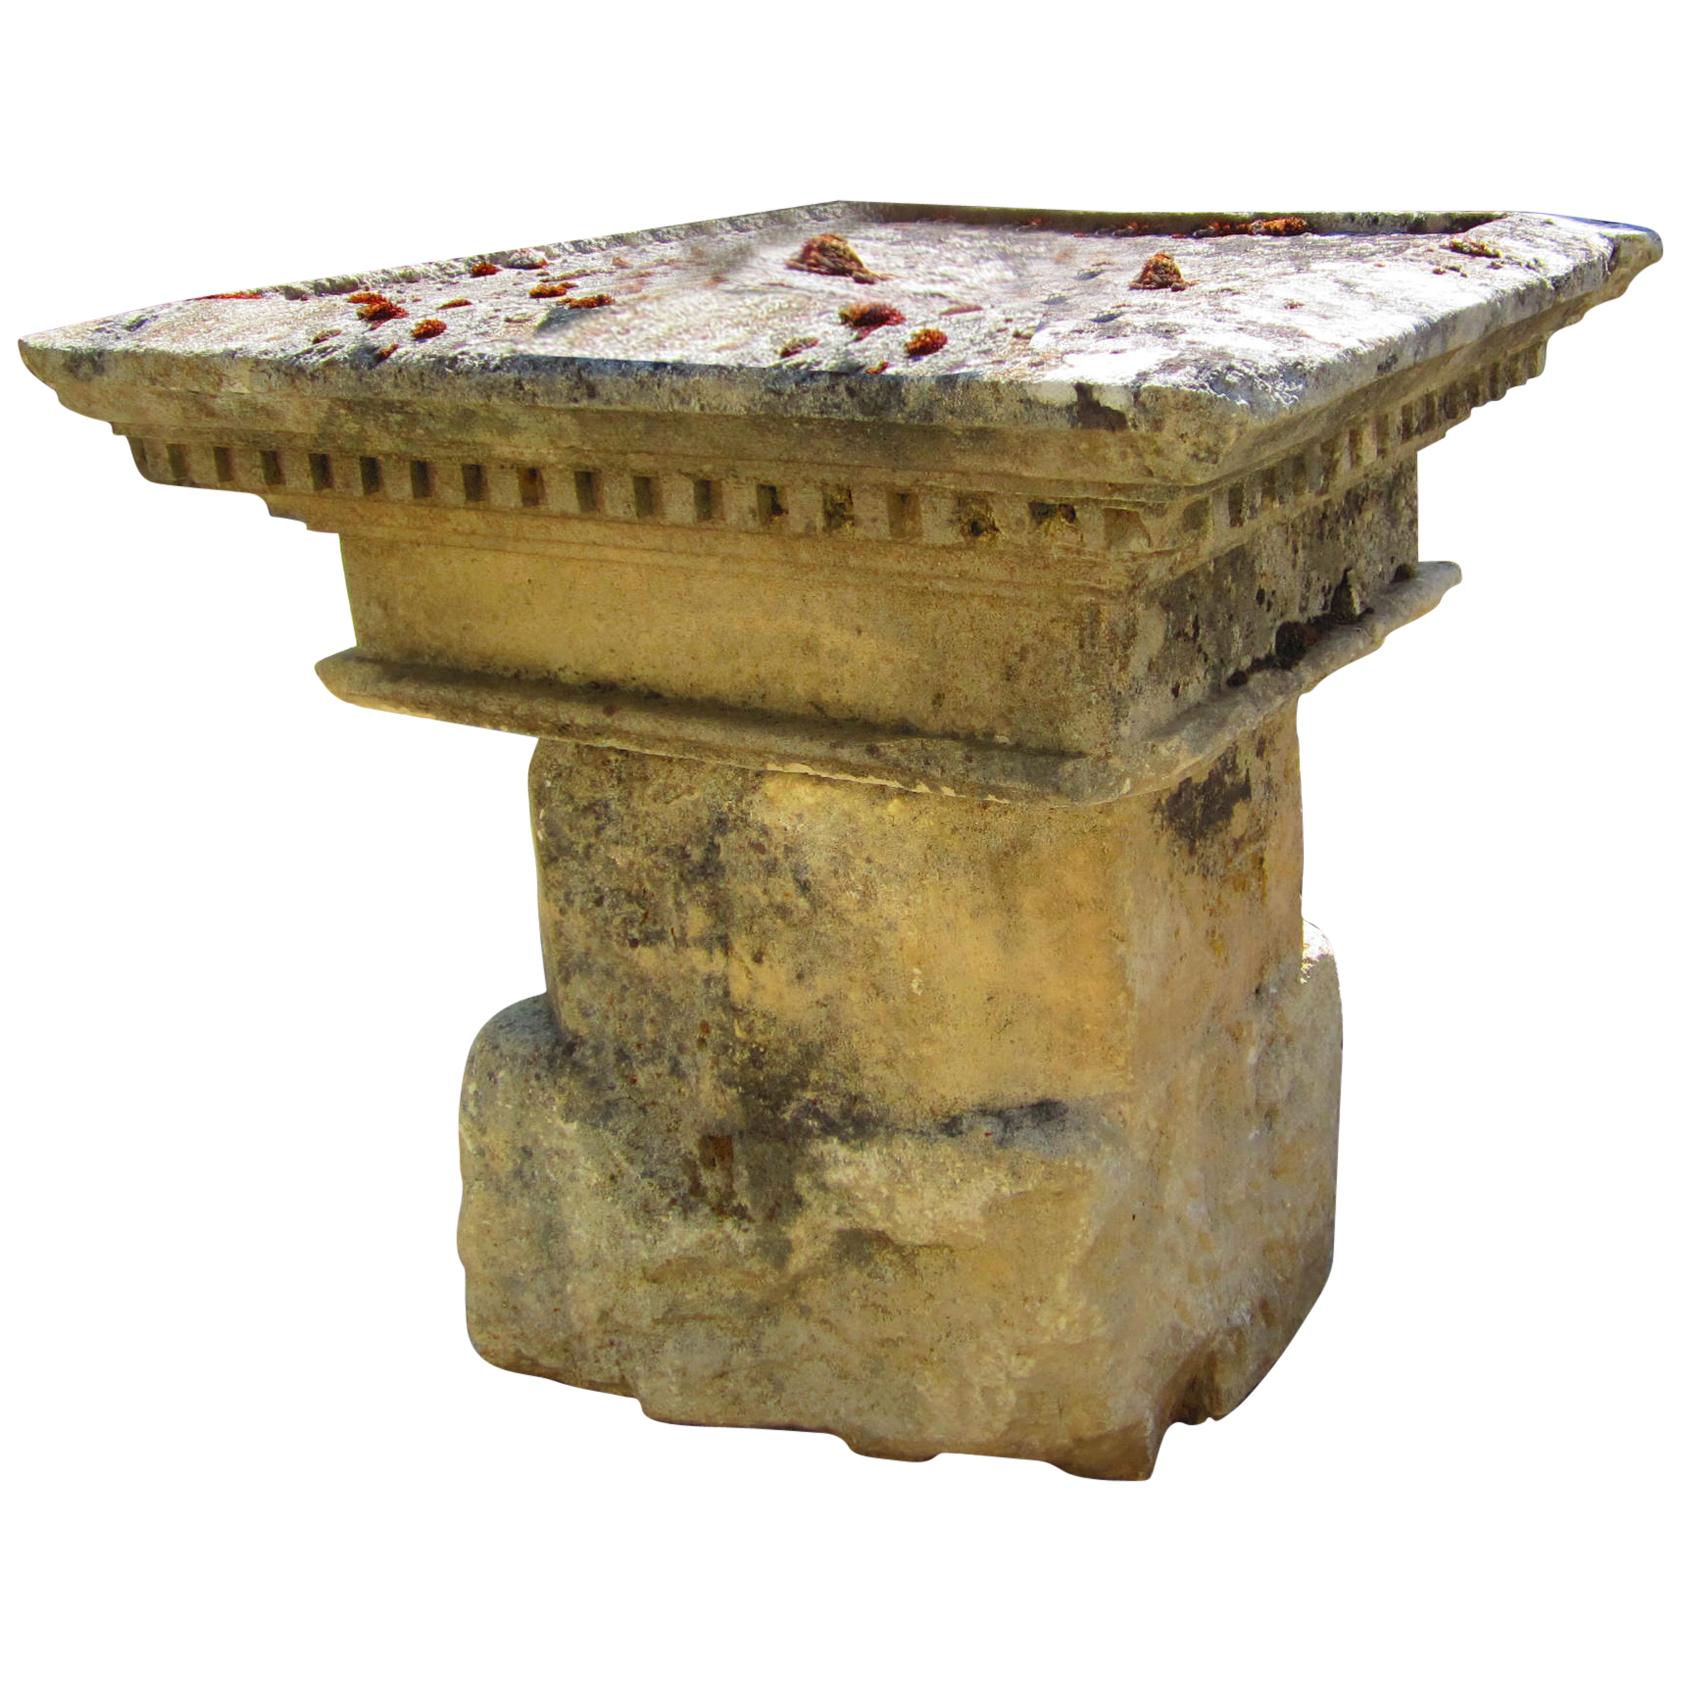 Carved Stone Antique Garden Outdoor Indoor Side Center Coffee Table Farm rustic